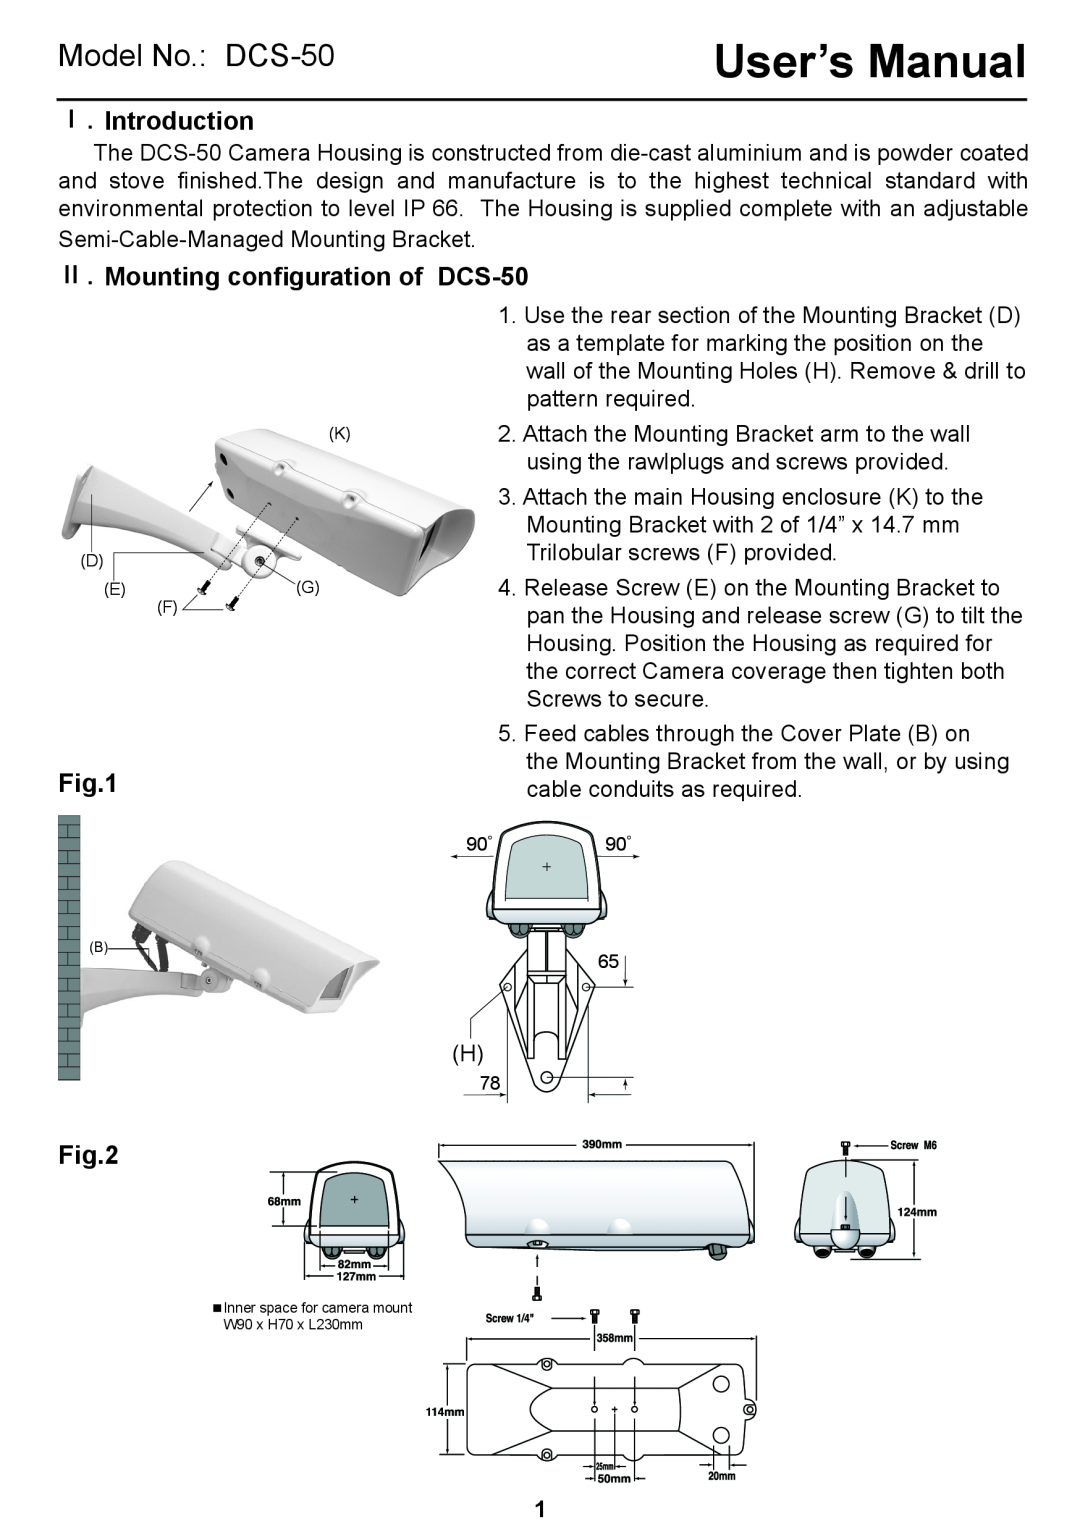 D-Link user manual Ⅰ.Introduction, Ⅱ. Mounting conﬁguration of DCS-50, Model No. DCS-50 